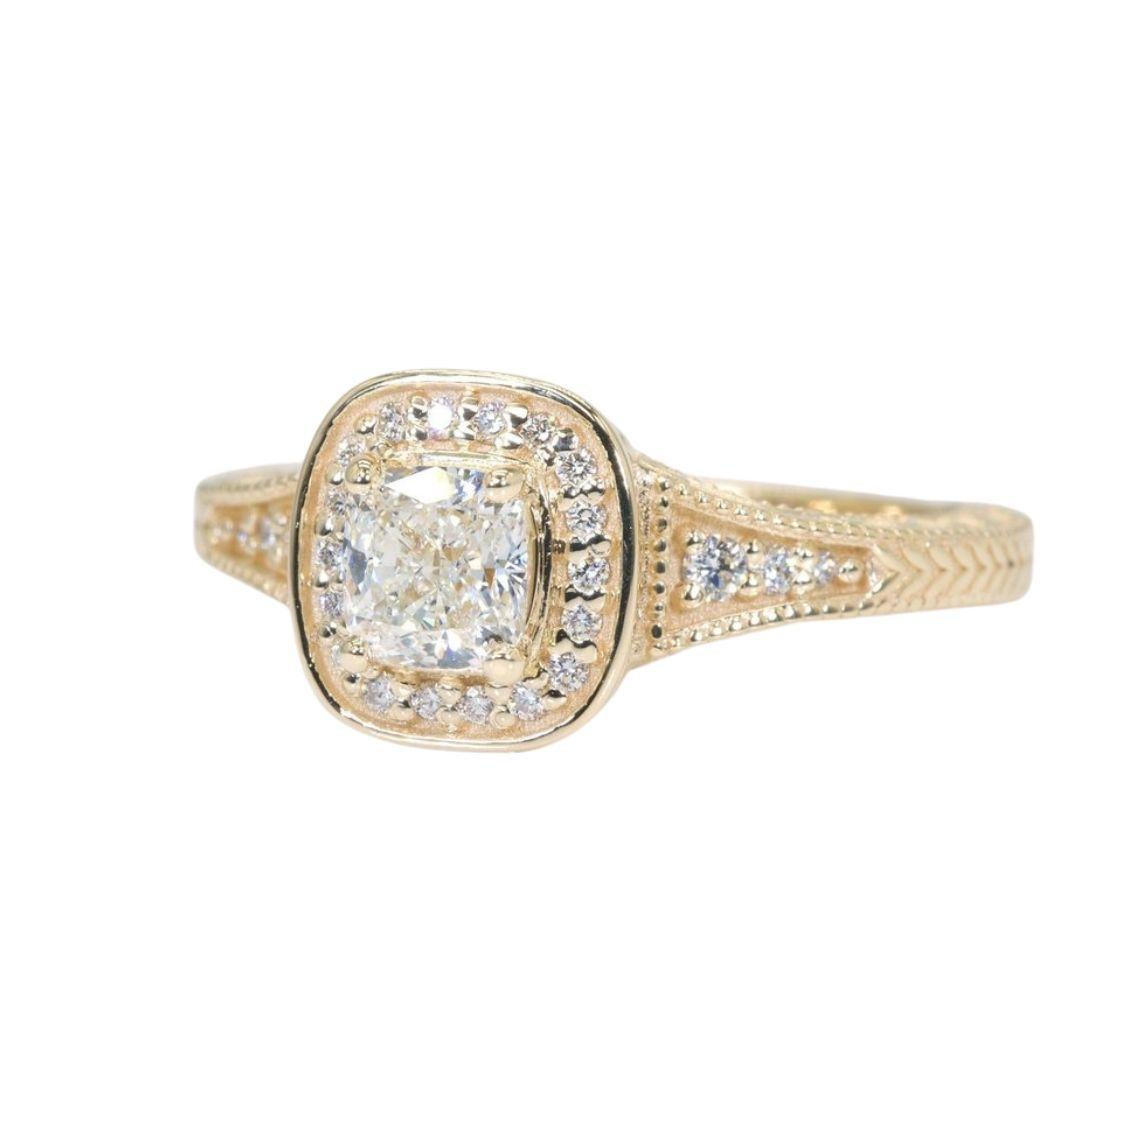 Embrace captivating fire and sophisticated charm with this breathtaking cushion modified brilliant diamond ring, showcasing a dazzling 0.7 carat center stone that radiates brilliance and timeless elegance. Crafted in gleaming 18K yellow gold, this